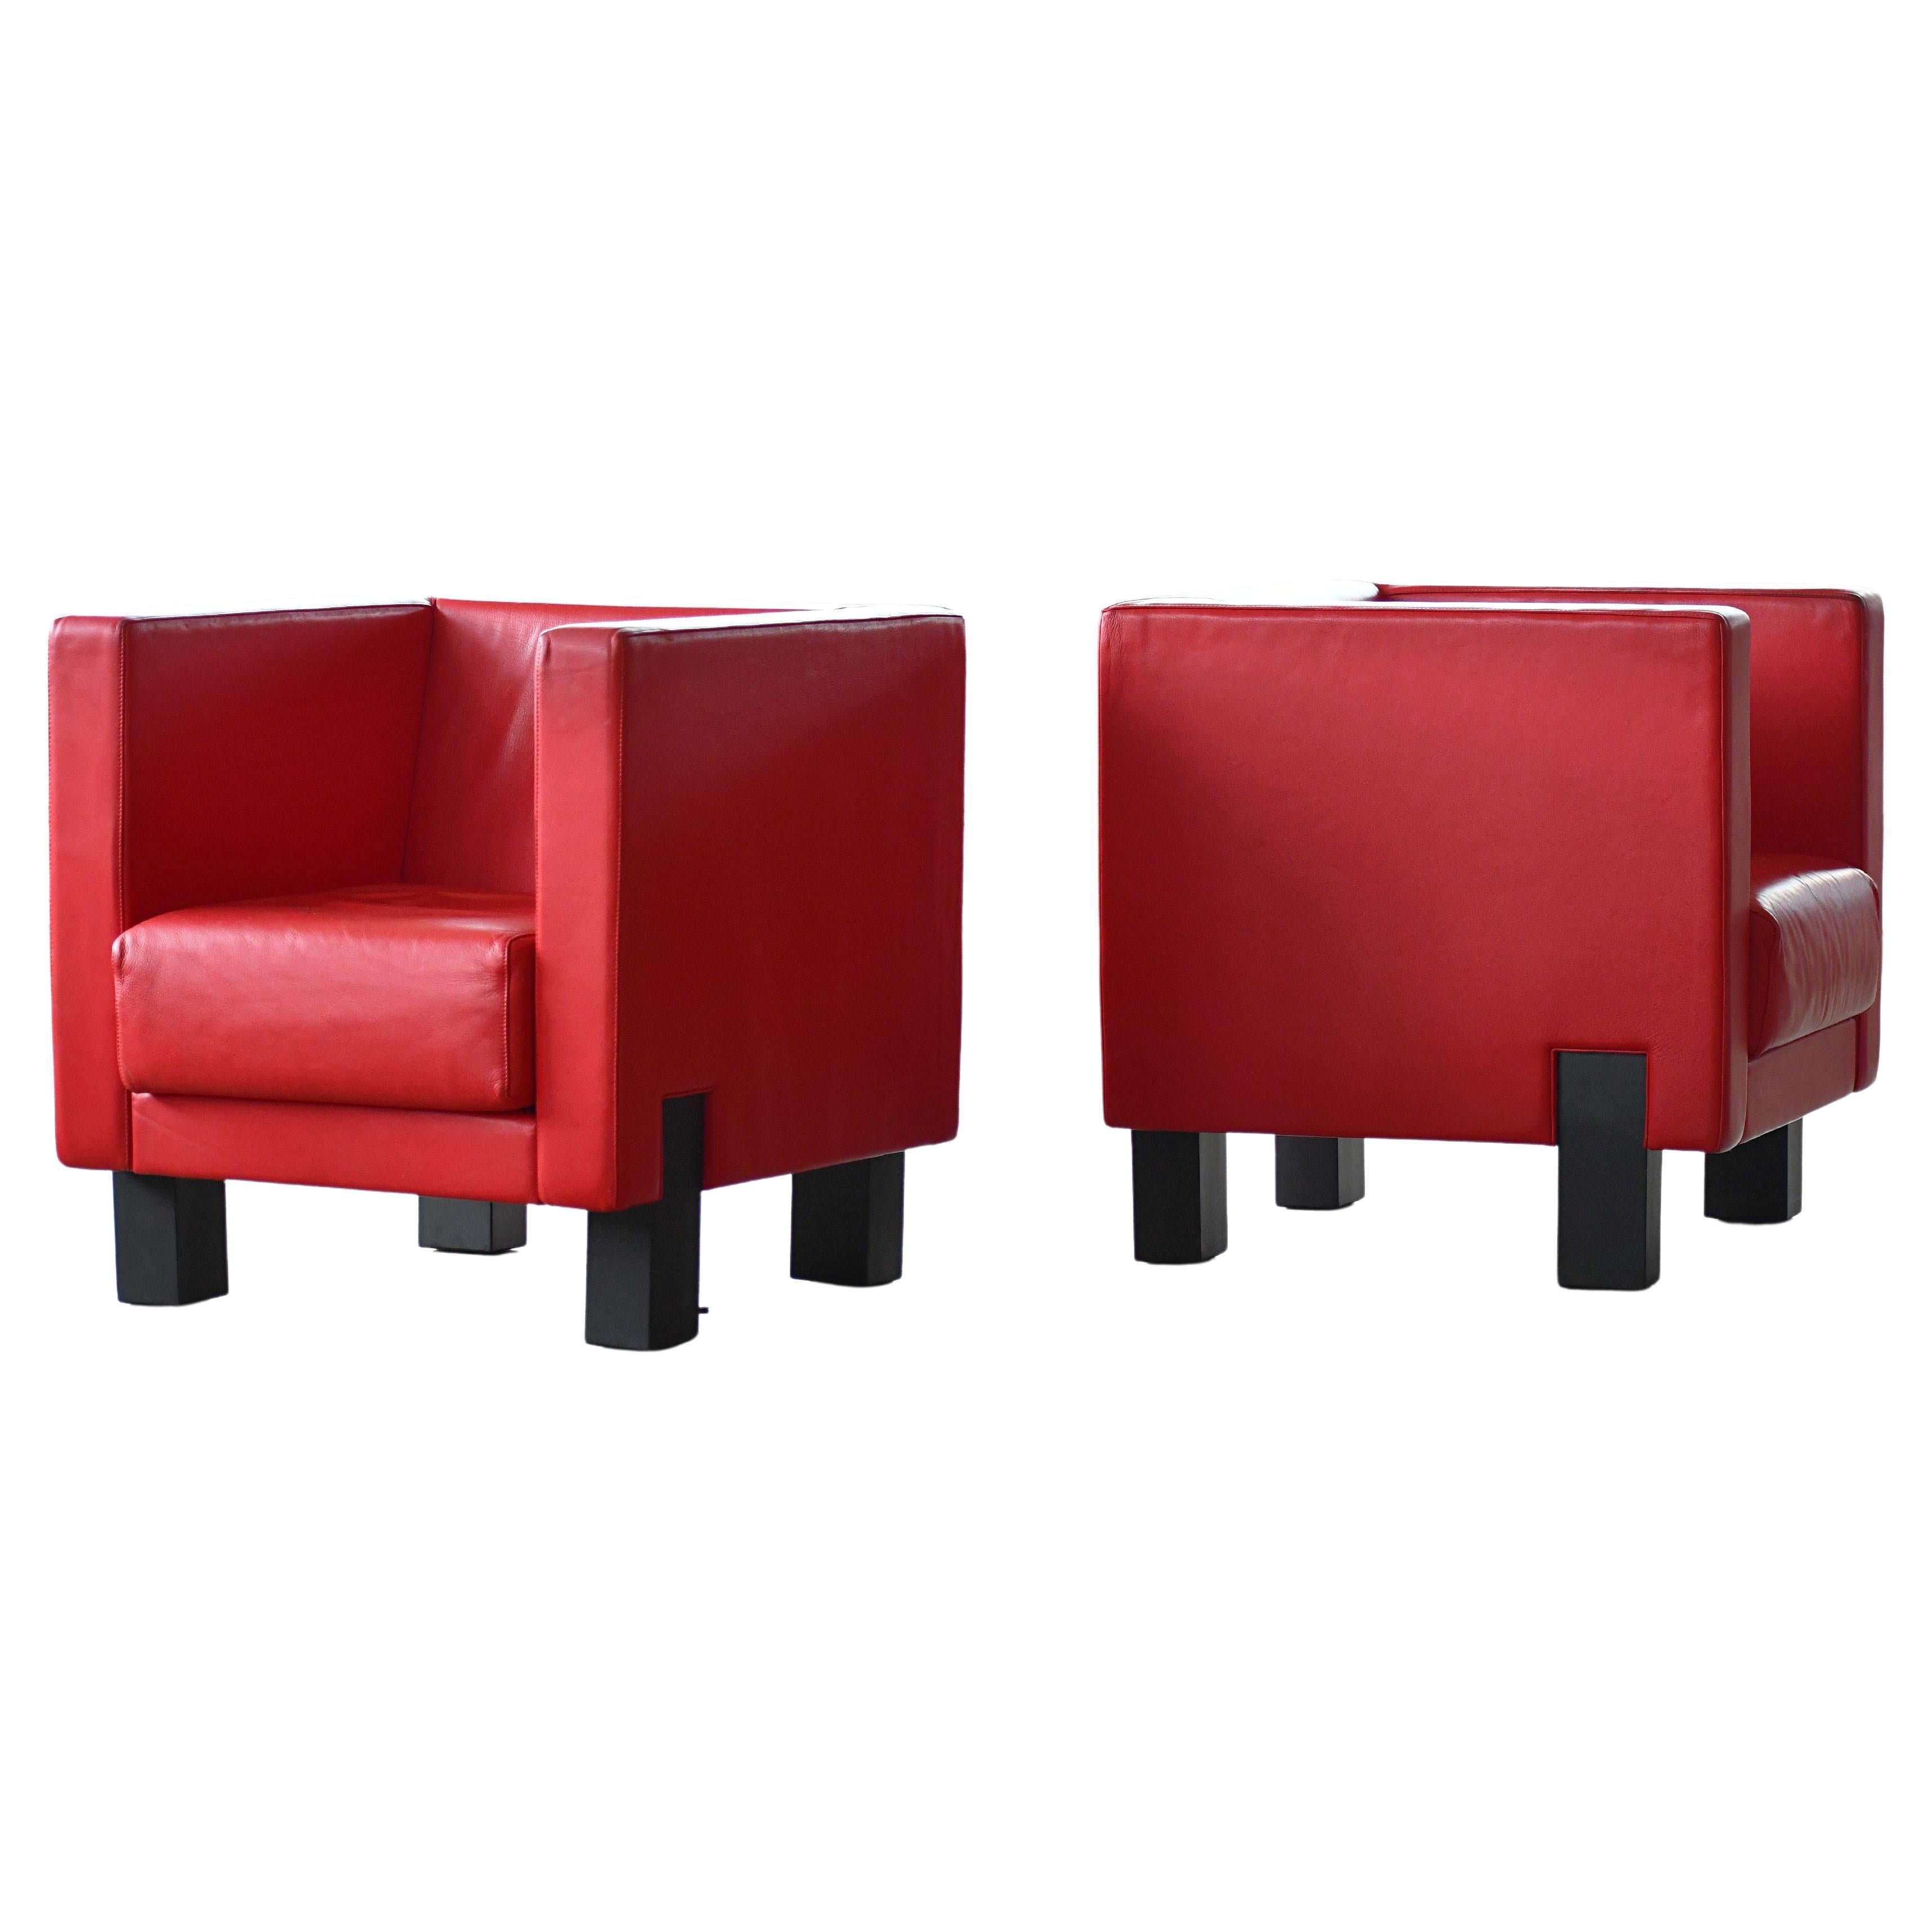 Pair of Italian Vintage Club Chairs in Red Leather ca. 1970's by Poltrona Frau For Sale